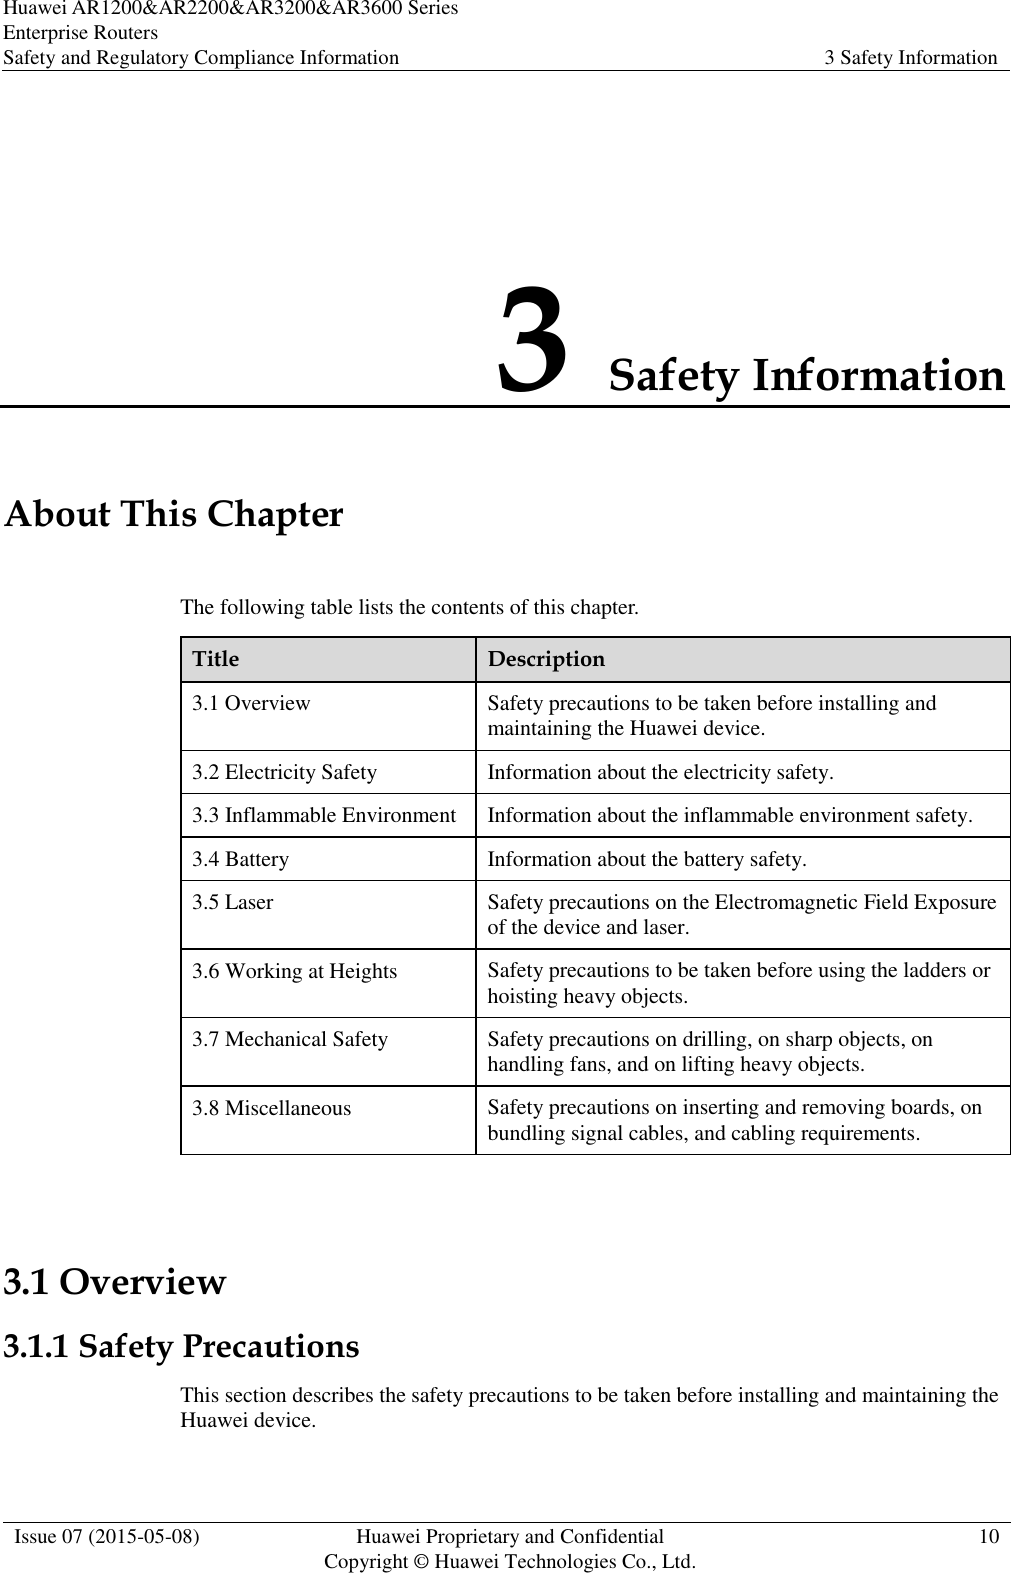 Huawei AR1200&amp;AR2200&amp;AR3200&amp;AR3600 Series Enterprise Routers Safety and Regulatory Compliance Information 3 Safety Information  Issue 07 (2015-05-08) Huawei Proprietary and Confidential           Copyright © Huawei Technologies Co., Ltd. 10  3 Safety Information About This Chapter The following table lists the contents of this chapter. Title Description 3.1 Overview Safety precautions to be taken before installing and maintaining the Huawei device. 3.2 Electricity Safety Information about the electricity safety. 3.3 Inflammable Environment Information about the inflammable environment safety. 3.4 Battery Information about the battery safety. 3.5 Laser Safety precautions on the Electromagnetic Field Exposure of the device and laser. 3.6 Working at Heights Safety precautions to be taken before using the ladders or hoisting heavy objects. 3.7 Mechanical Safety Safety precautions on drilling, on sharp objects, on handling fans, and on lifting heavy objects. 3.8 Miscellaneous Safety precautions on inserting and removing boards, on bundling signal cables, and cabling requirements.  3.1 Overview 3.1.1 Safety Precautions This section describes the safety precautions to be taken before installing and maintaining the Huawei device. 